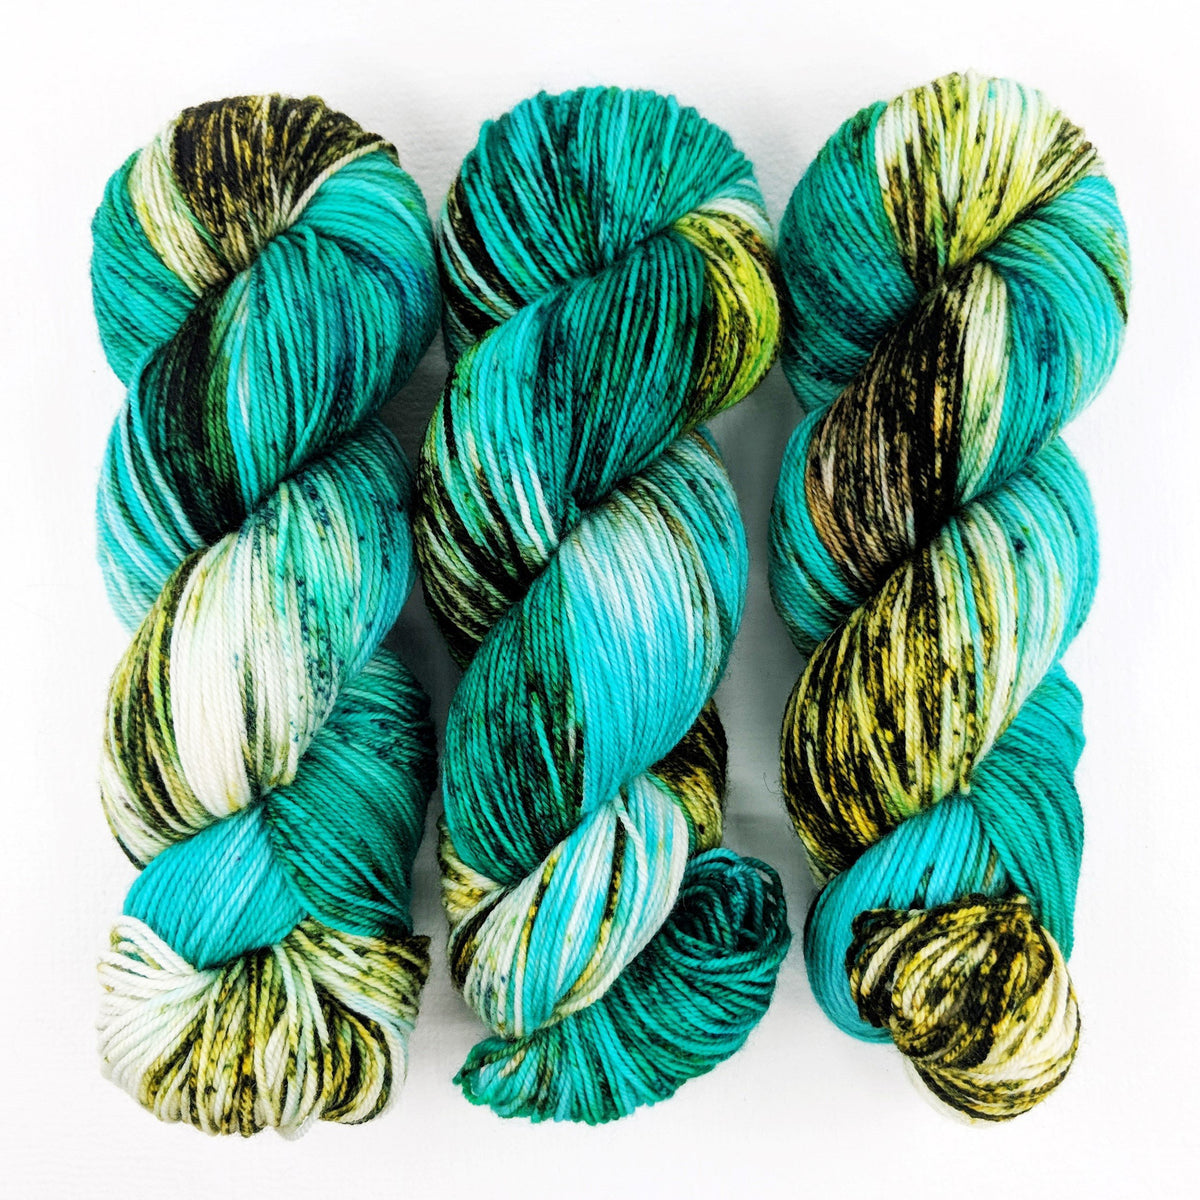 Northern Aurora - Revival Worsted - Dyed Stock